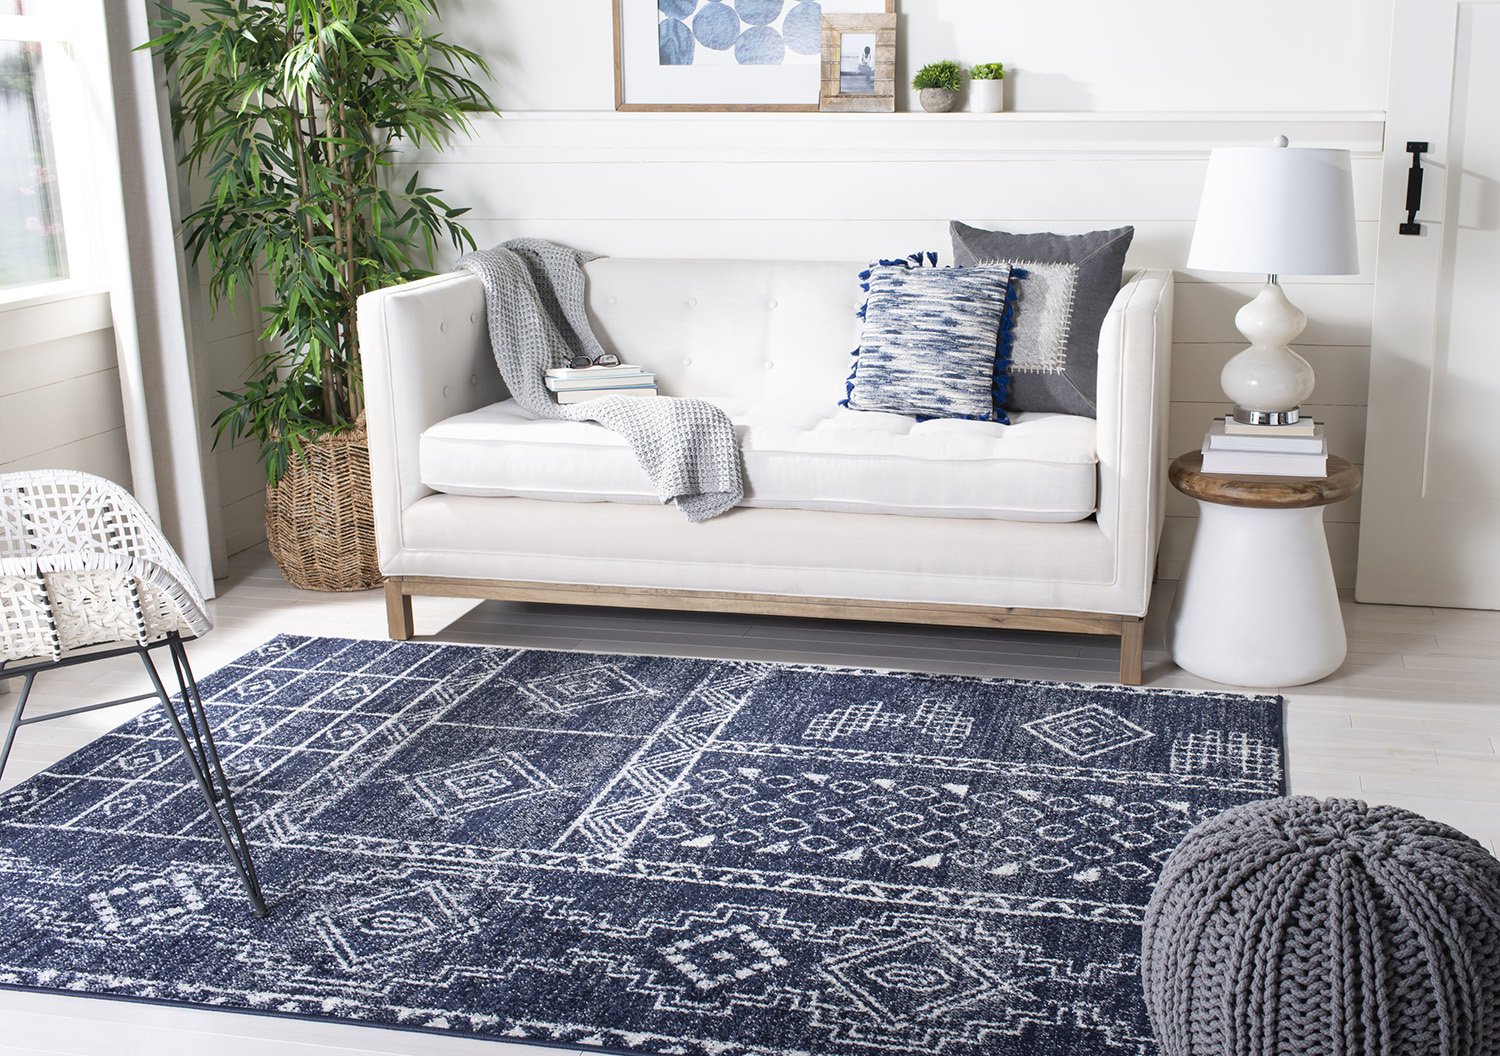 How To Clean A Polypropylene Rug | PlushRugs